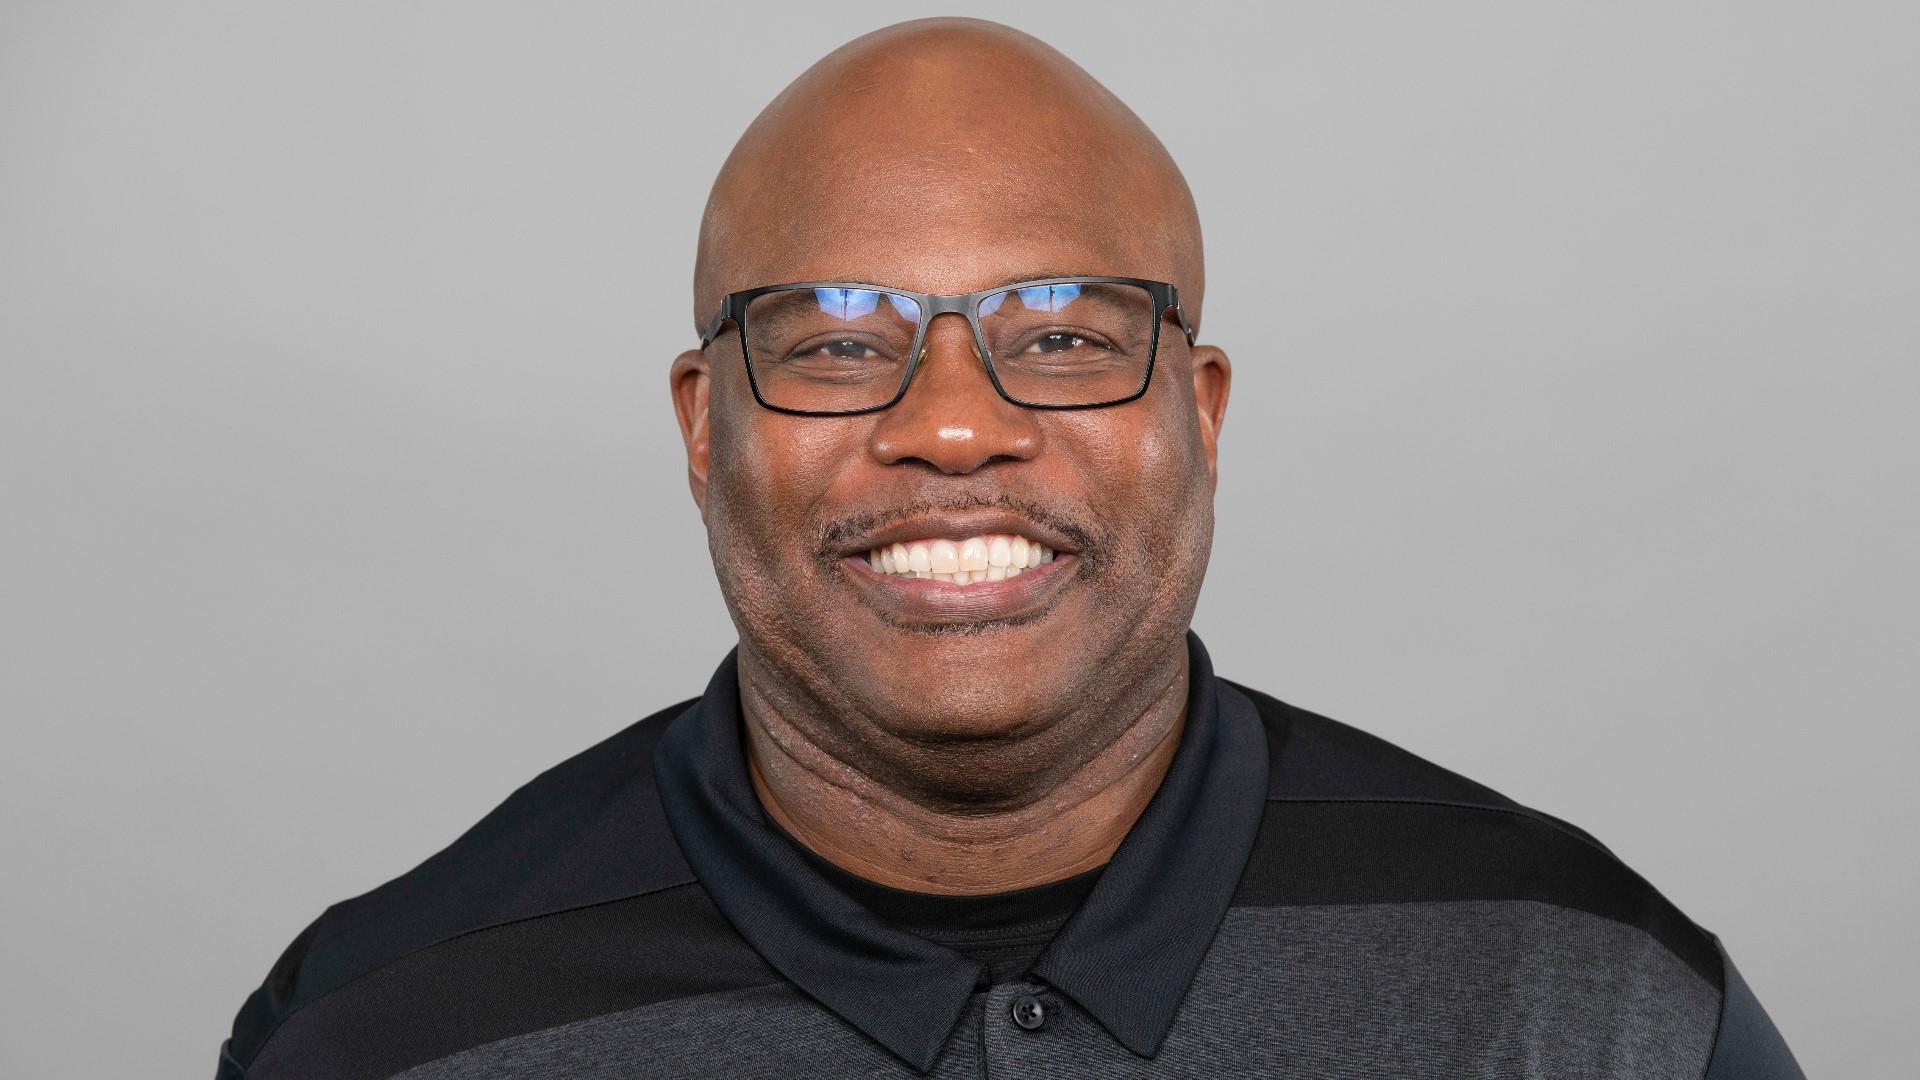 With the firing of head coach Ron Rivera, the Panthers announced that secondary coach Perry Fewell will be the interim coach until a permanent replacement is hired.